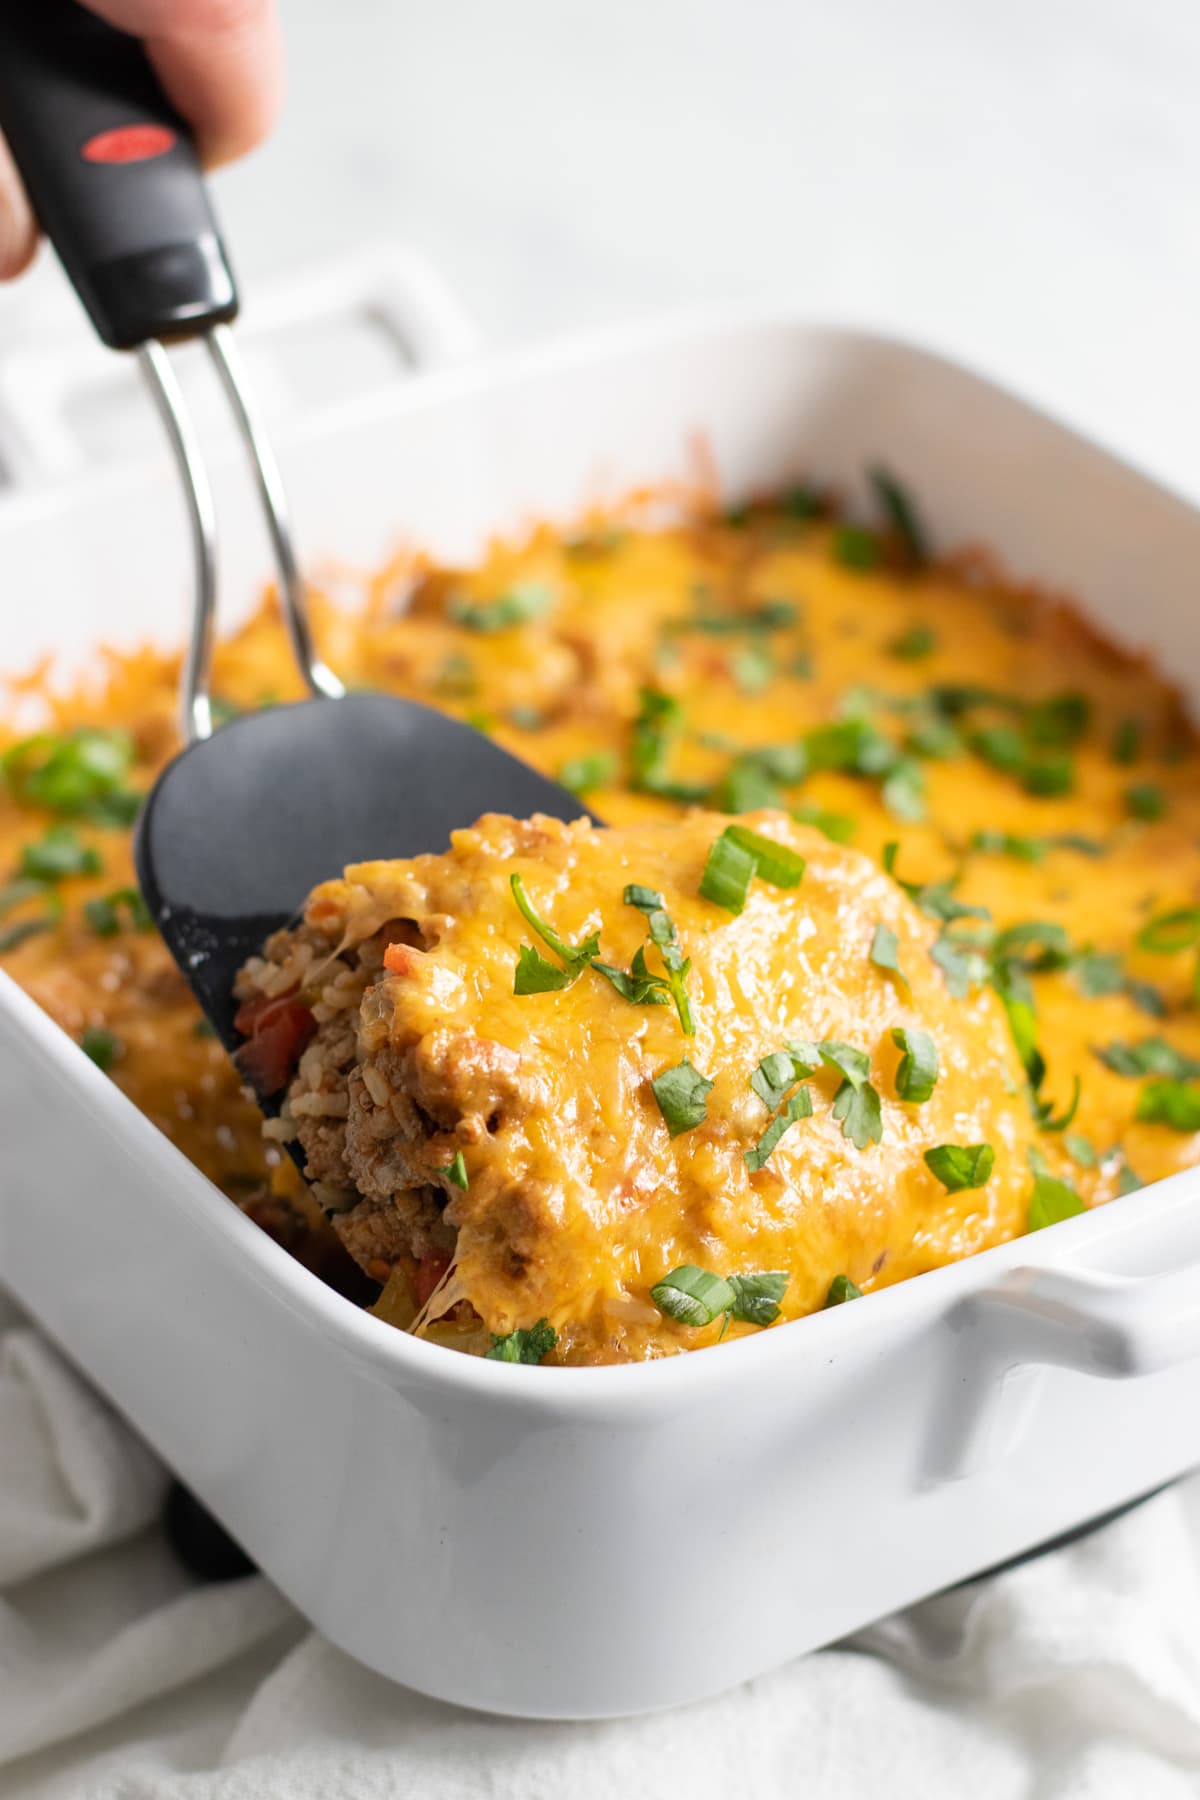 A black spatula lifting a serving of cheesy casserole made with ground turkey, brown rice, chiles, and tomatoes out of a square white baking dish.